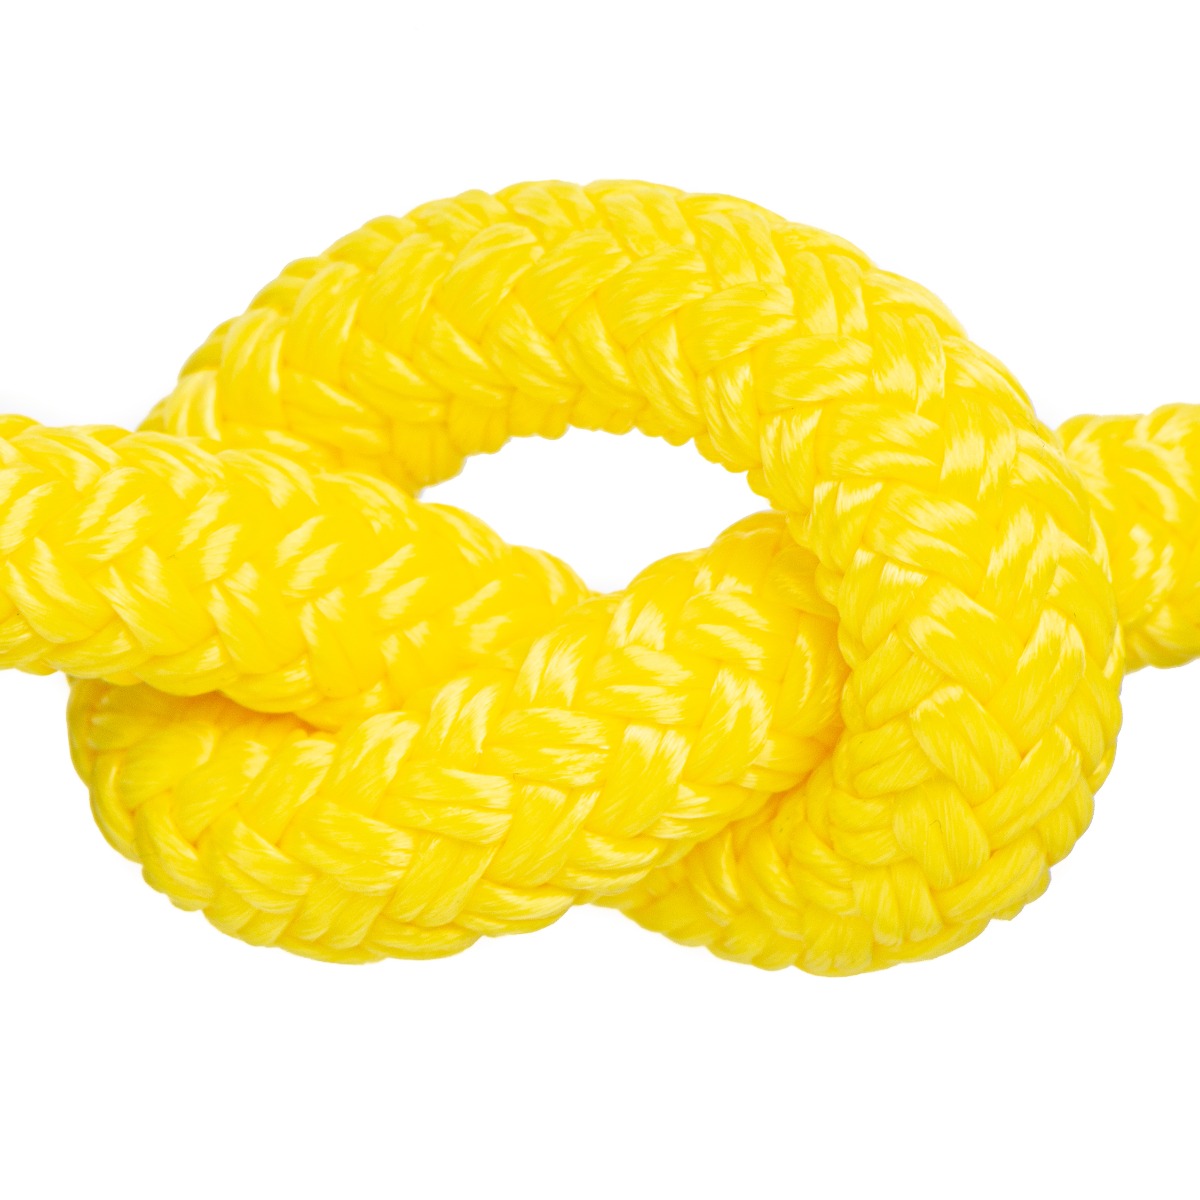 0120 Braided Polypropylene Rope PP 10mm 100m Canary-Yellow 